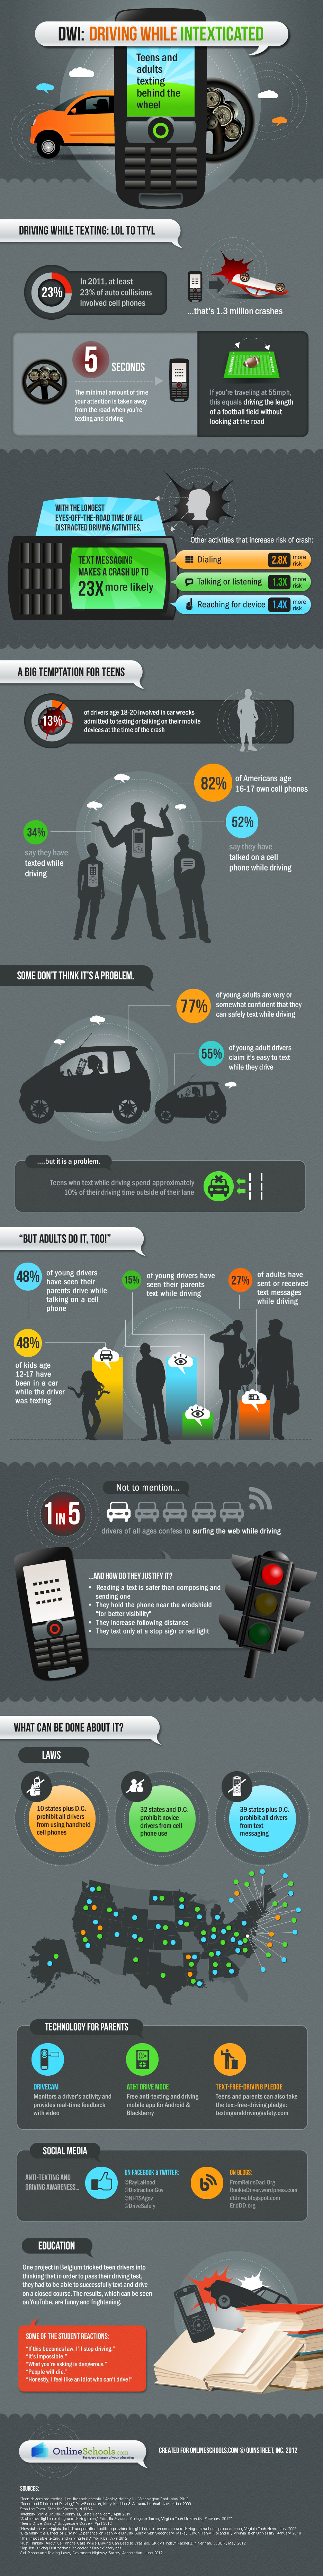 Texting While Driving: It’s Worse Than You Think [Infographic]